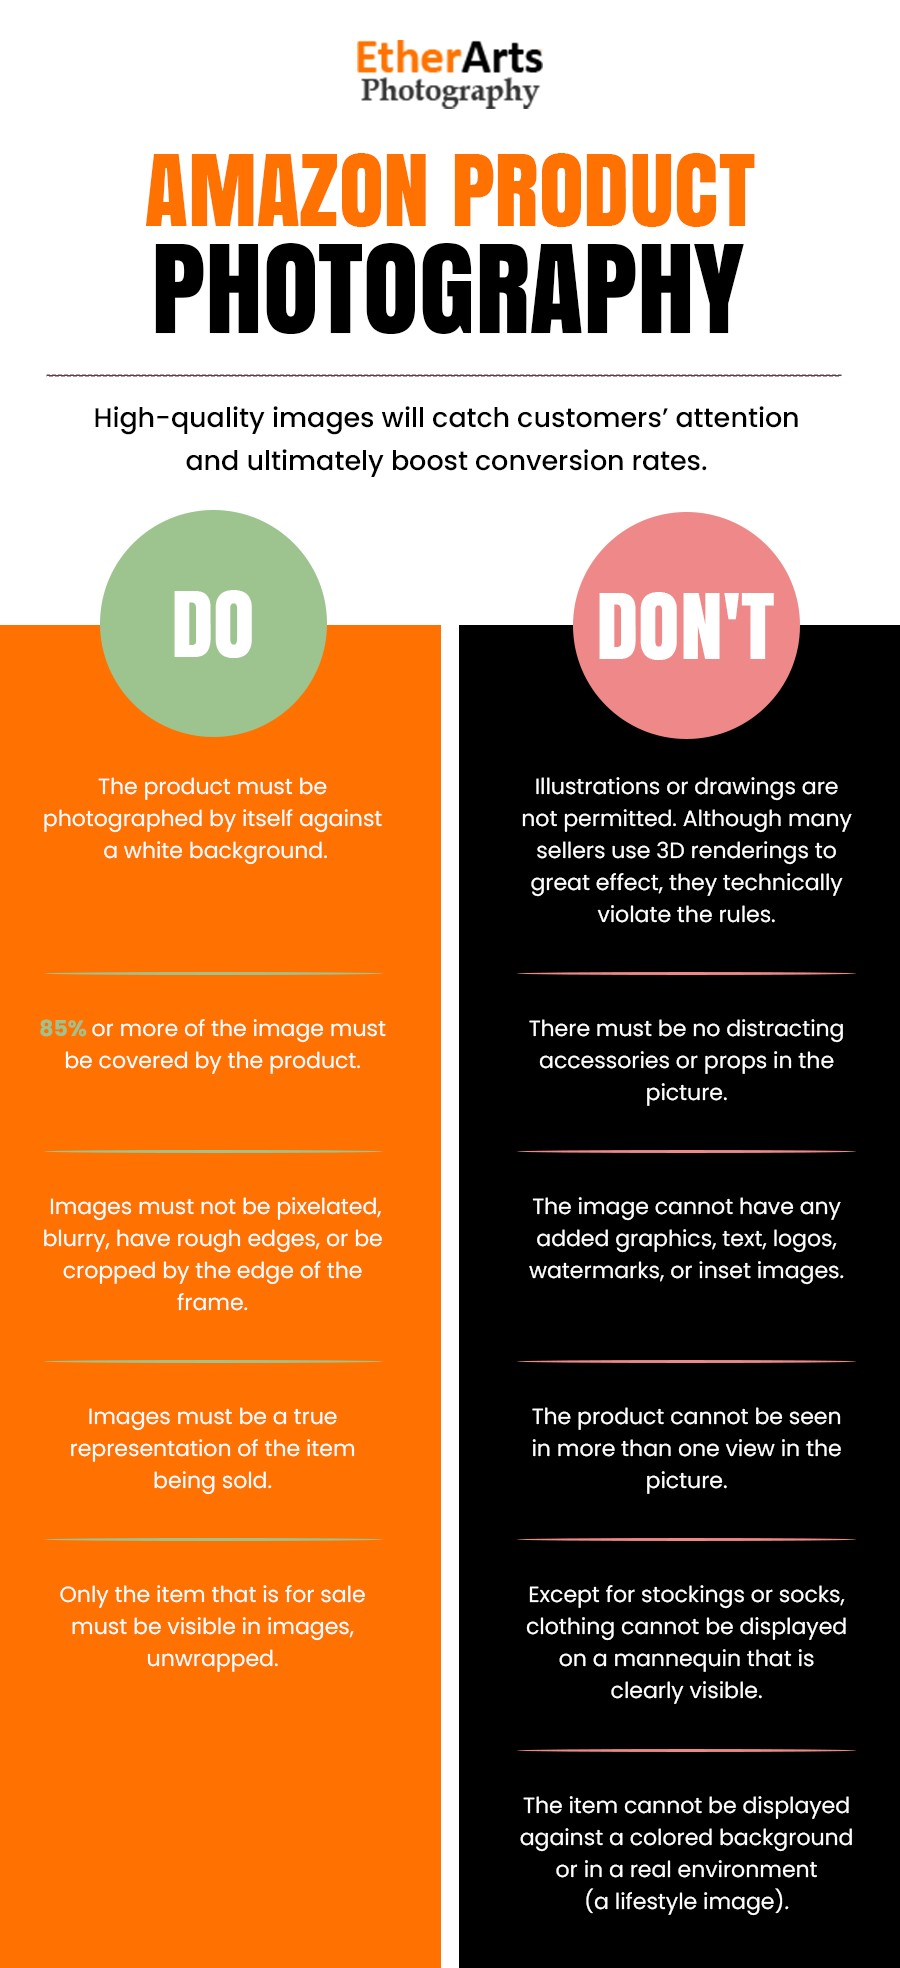 Amazon Photography Do’s and Don’t